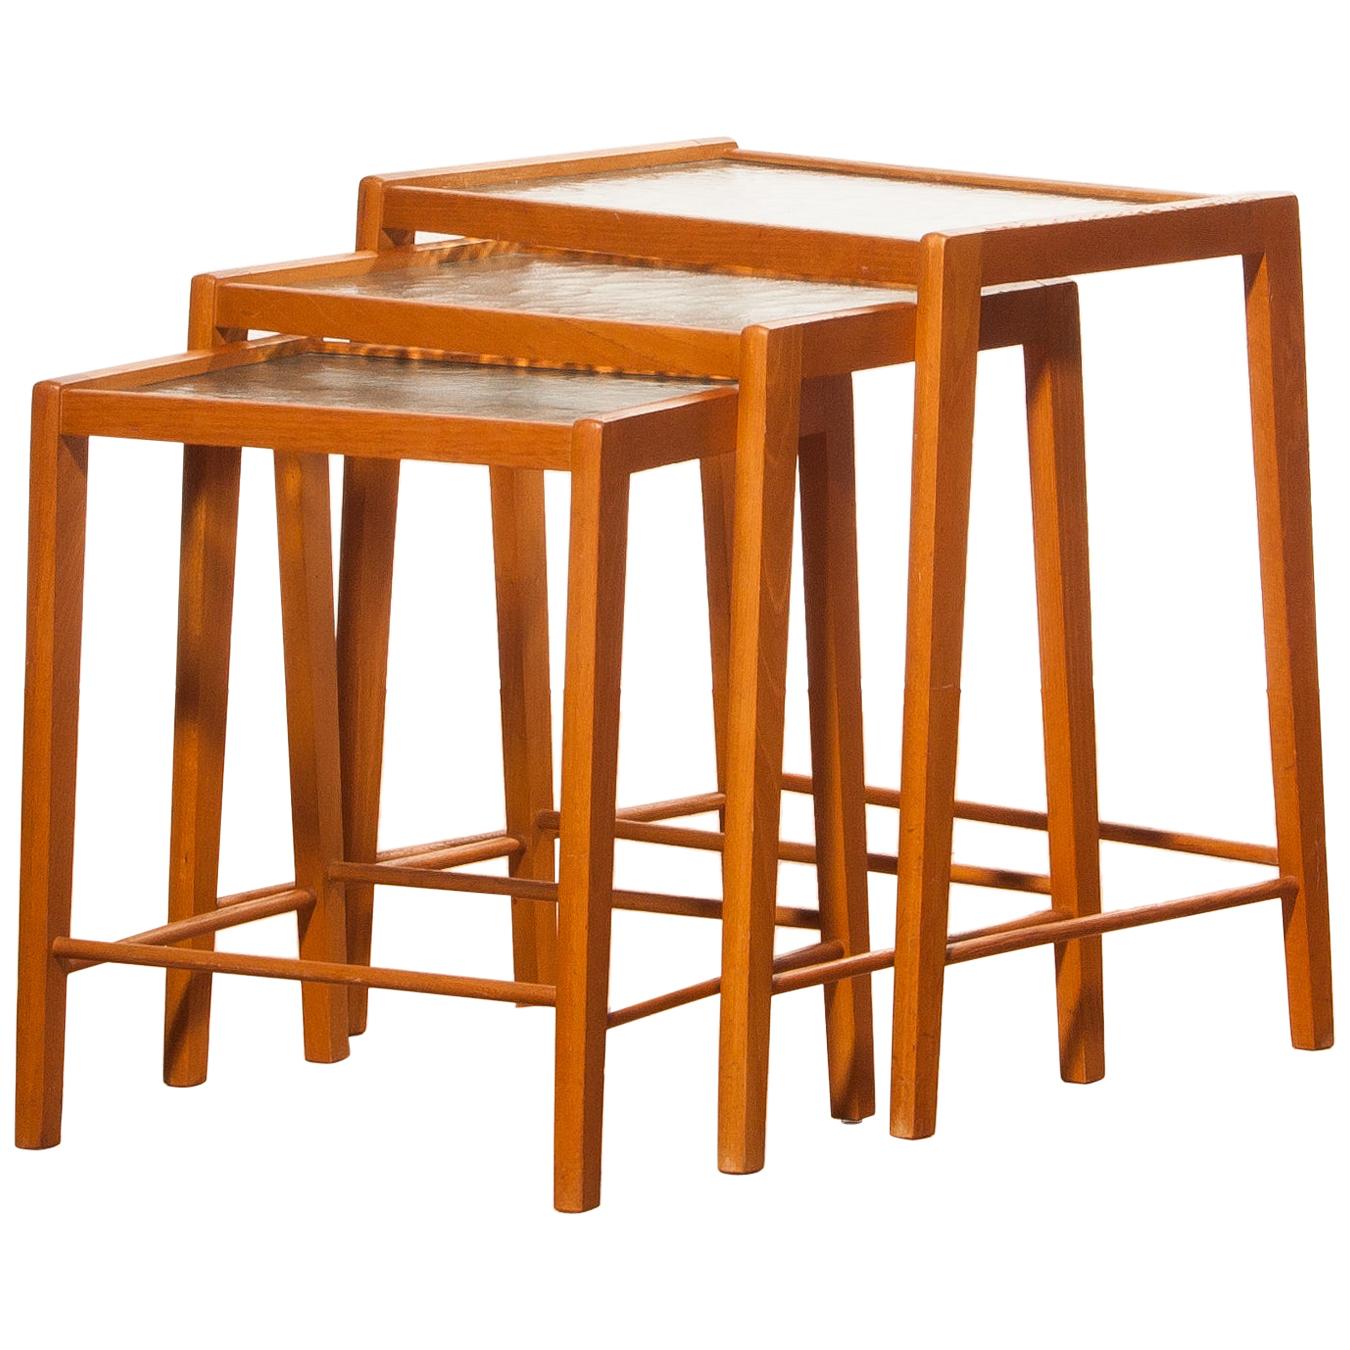 A lovely set of three nesting tables.
This beautiful set is made of beech with glass tops.
They are in very nice condition.
Period 1960s.
Dimensions: H 50 cm, W 46 cm, D 31 cm
H 46 cm, W 41 cm, D 29 cm
H 42 cm, W 36 cm, D 27 cm.

